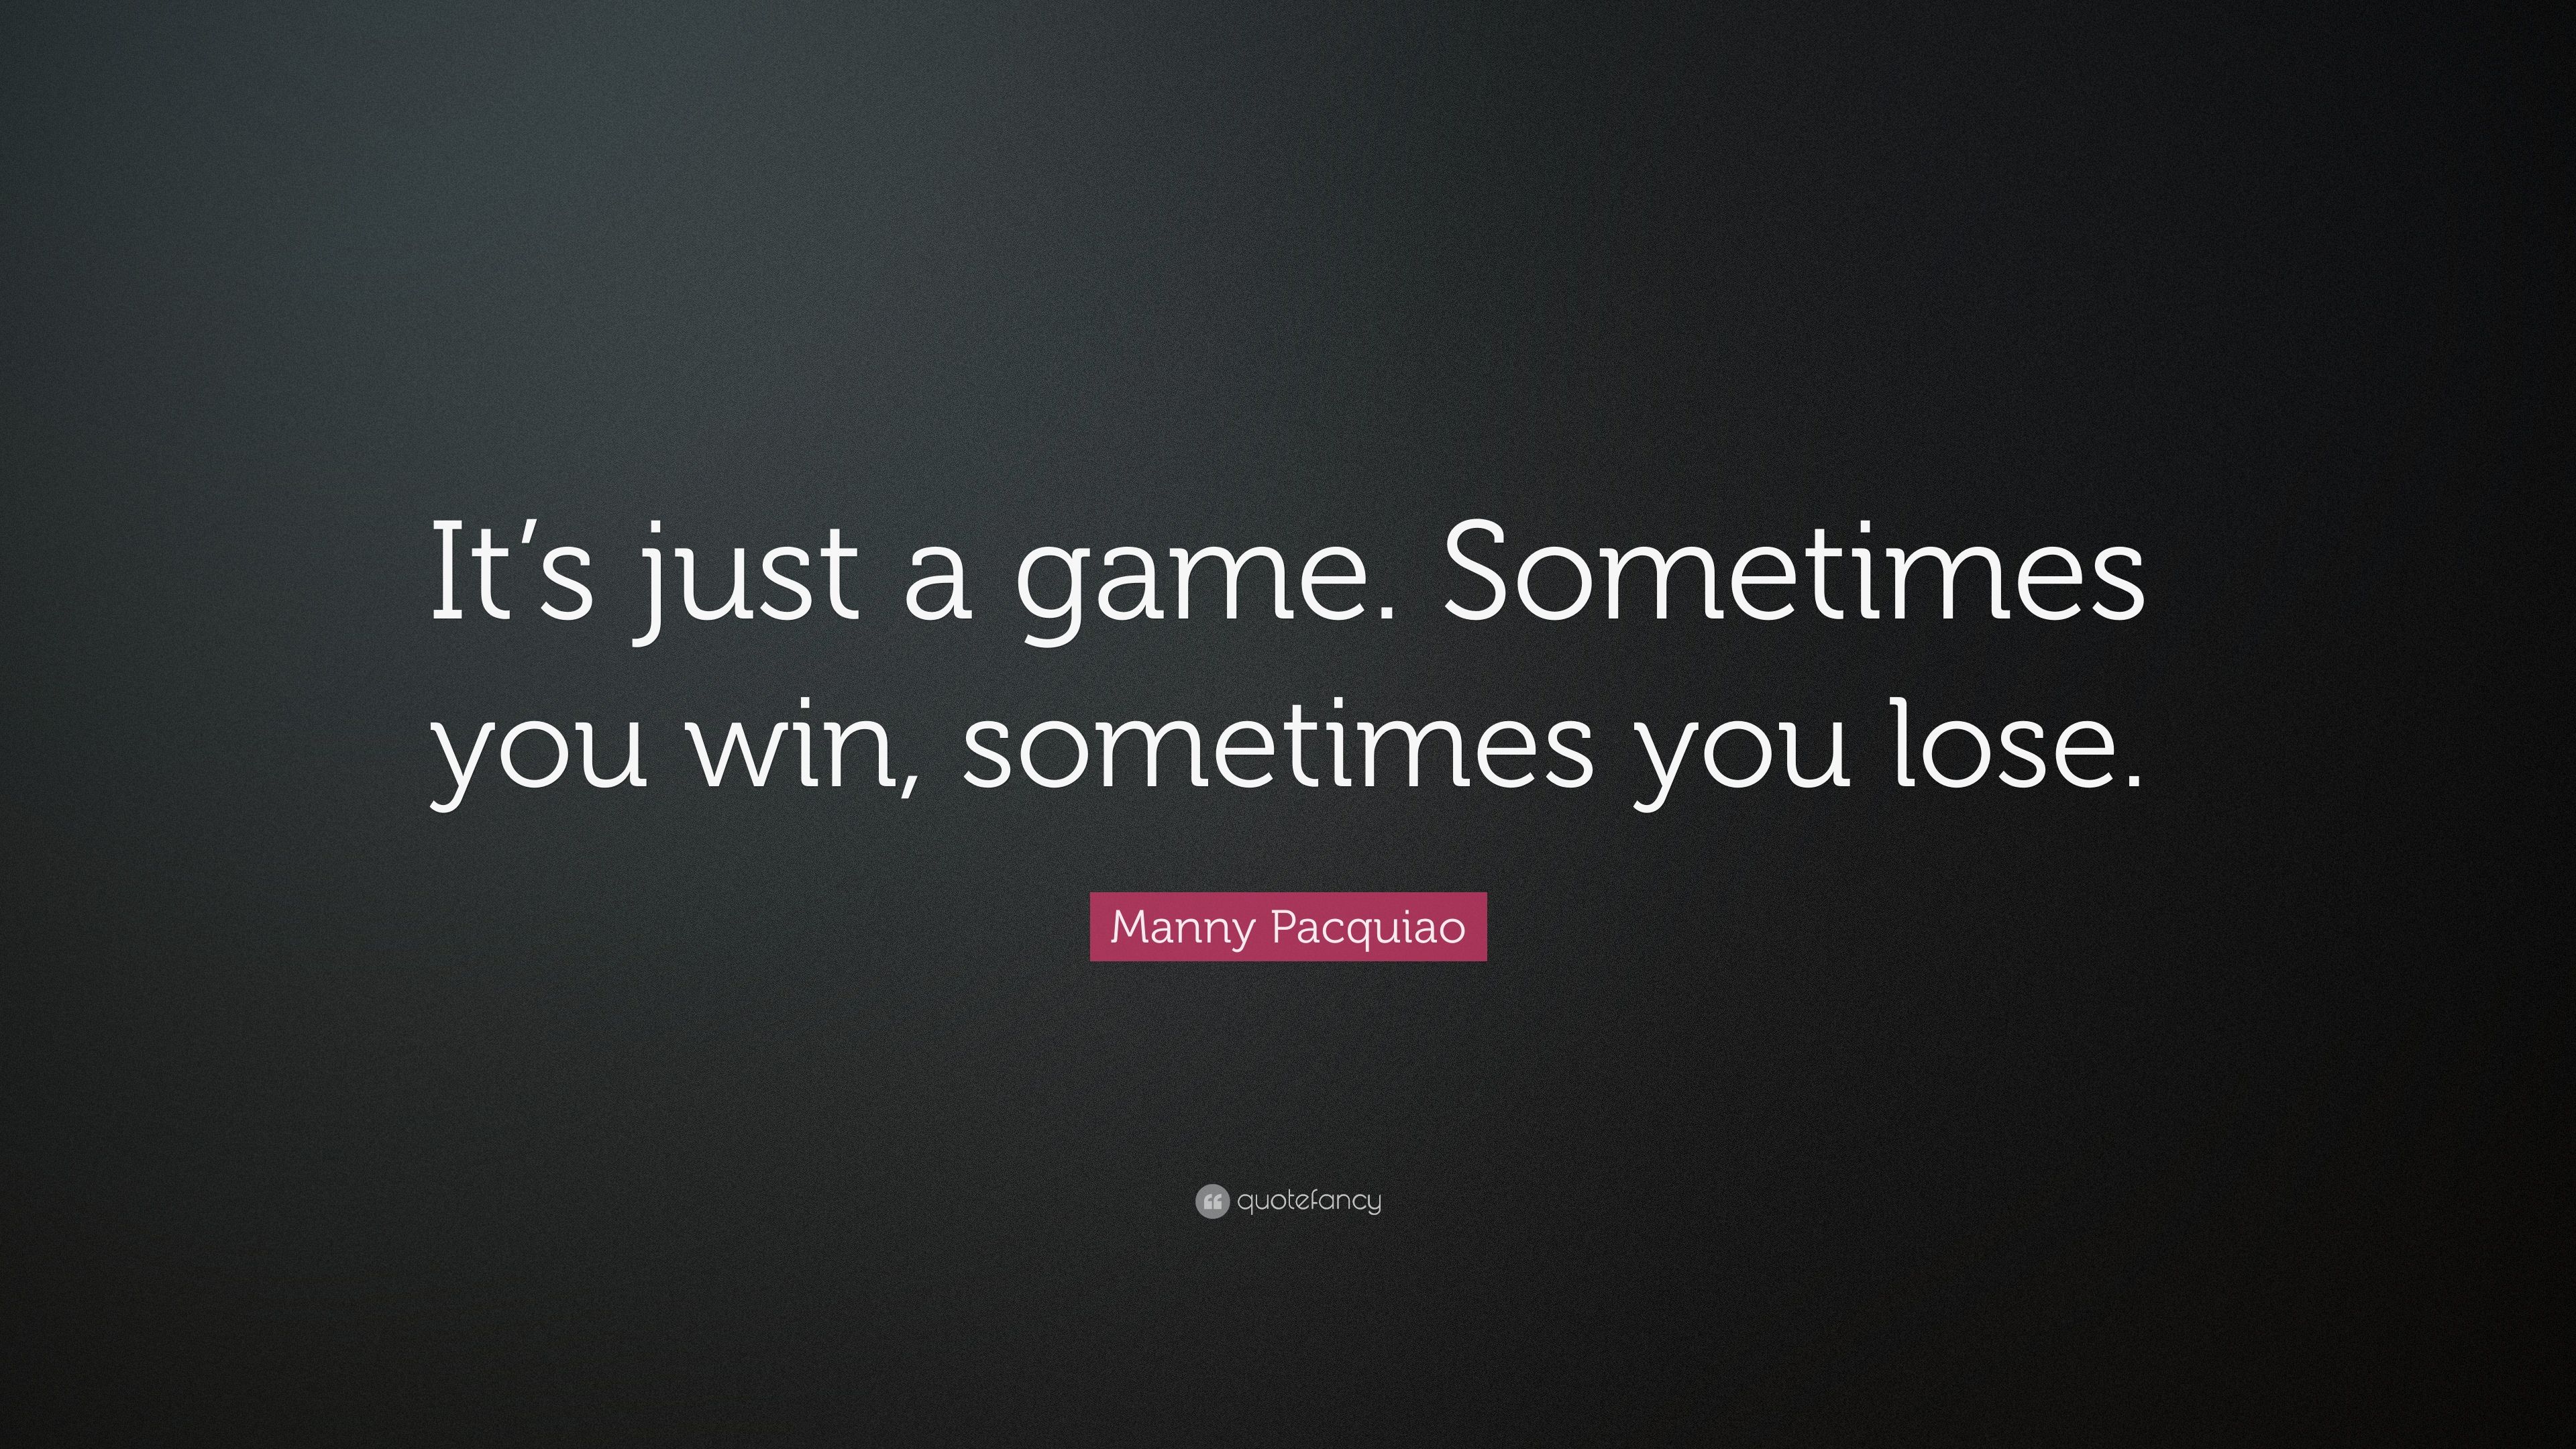 Manny Pacquiao Quotes (18 wallpapers) - Quotefancy